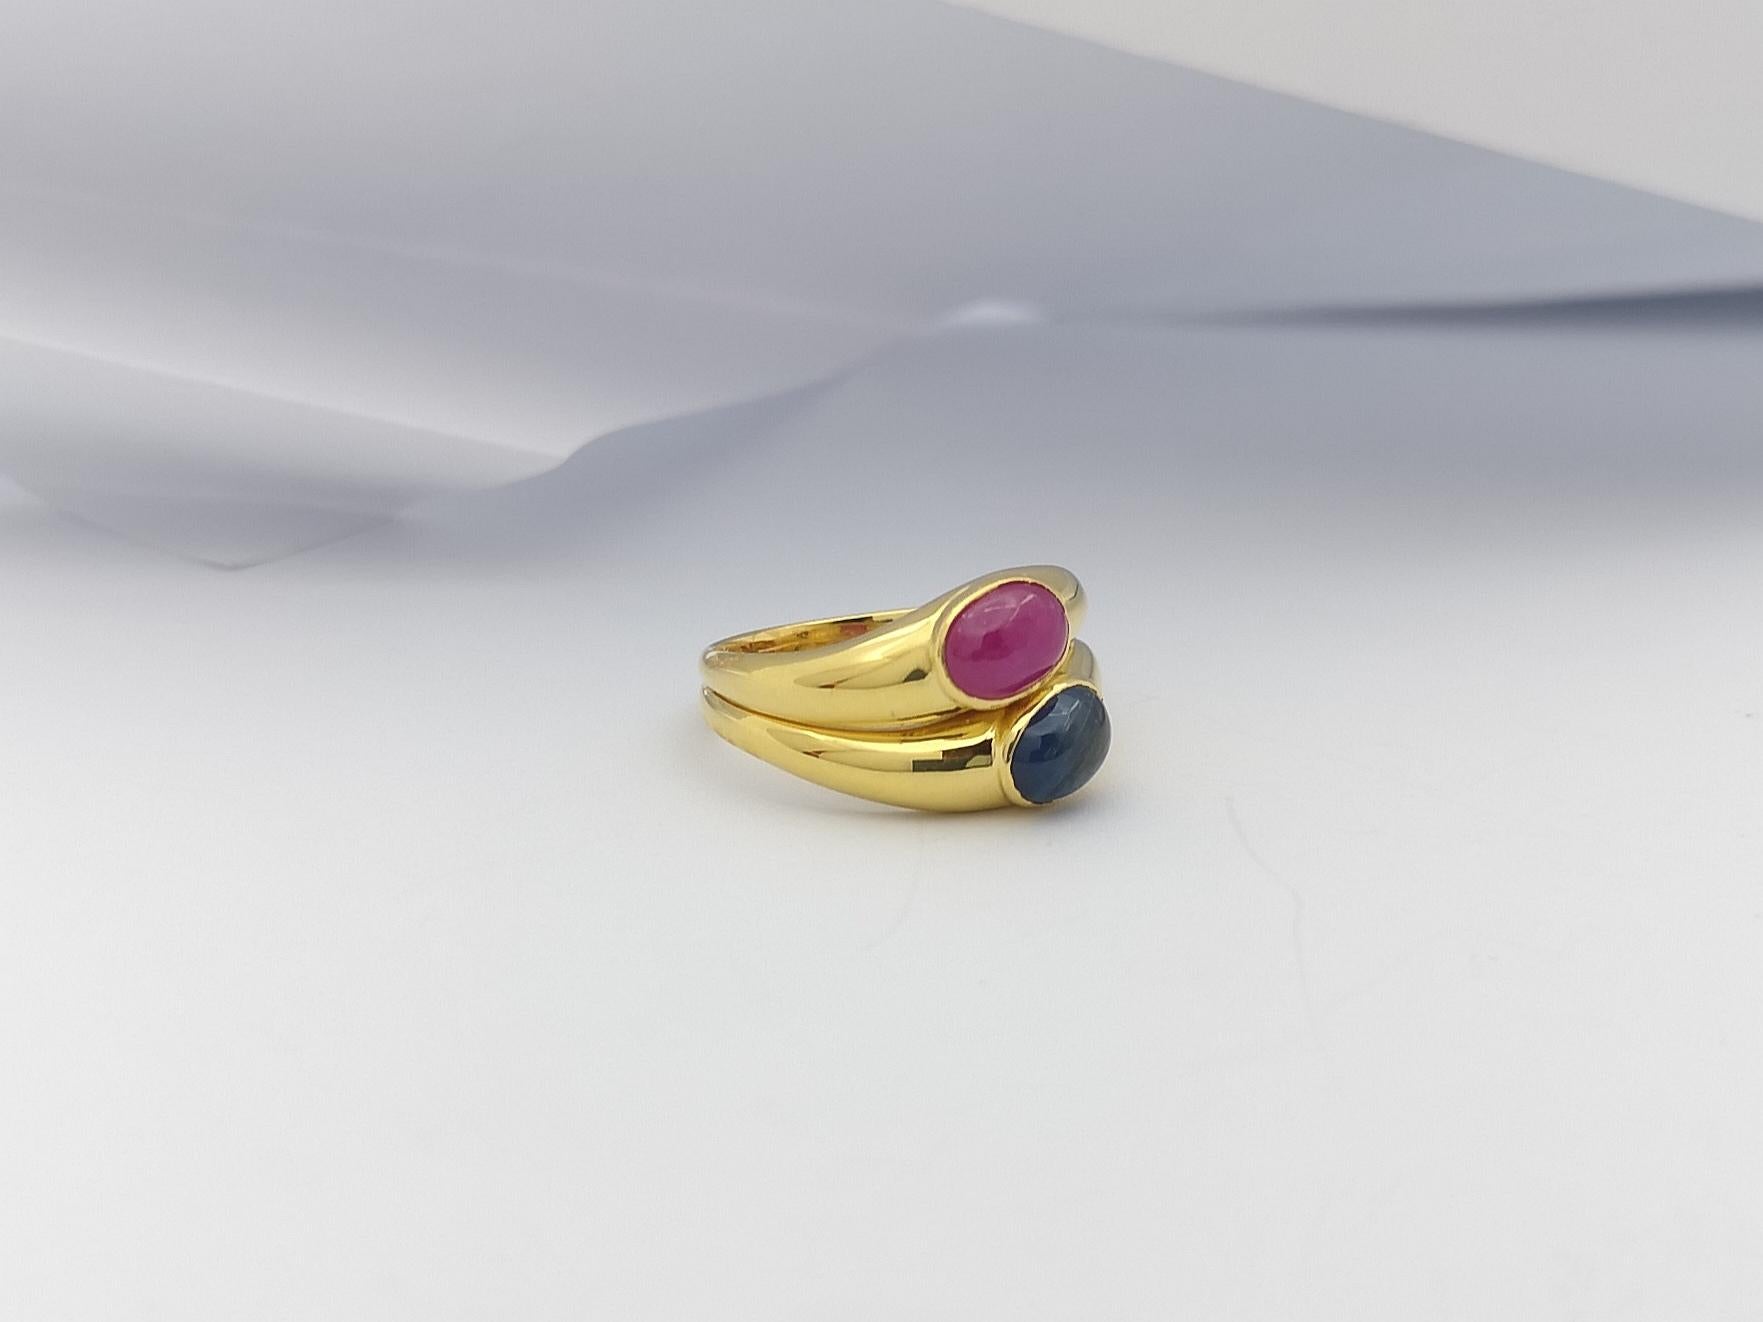 Cabochon Ruby and Cabochon Blue Sapphire Ring Set in 18 Karat Gold Settings For Sale 3